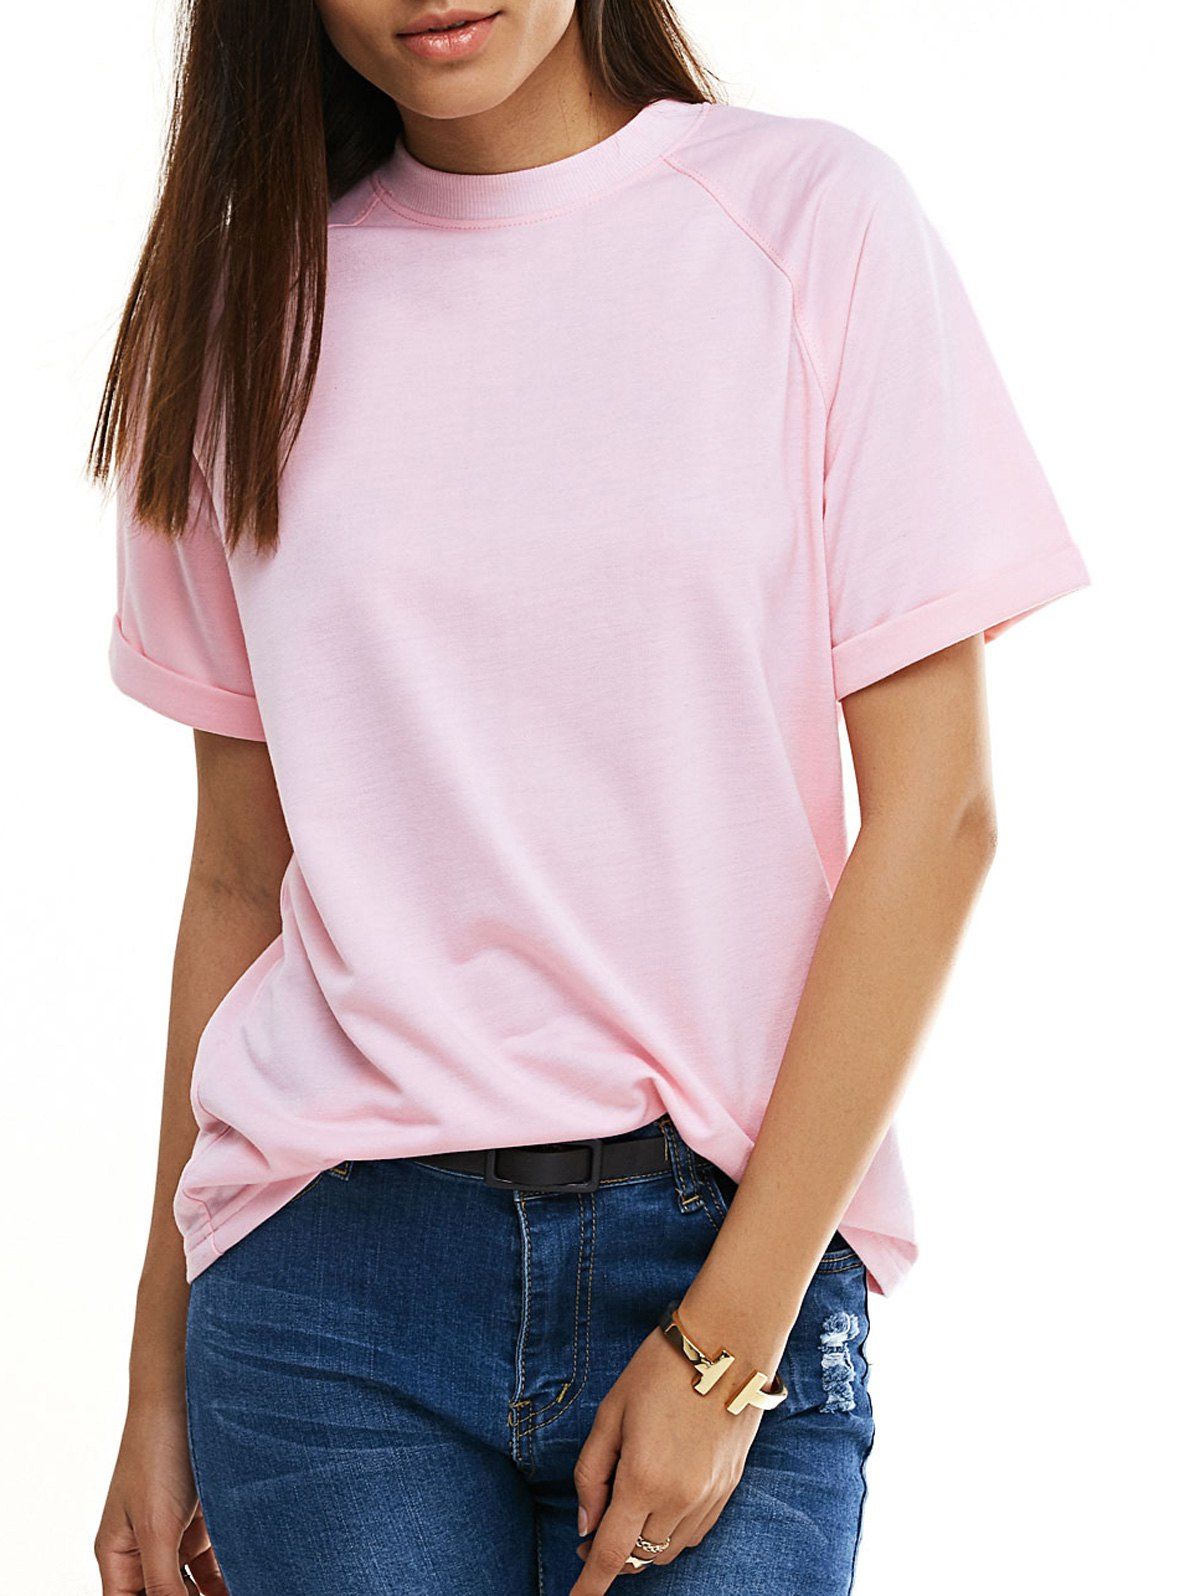 [41% OFF] 2021 Candy Color Short Sleeve T-Shirt In PINK | DressLily